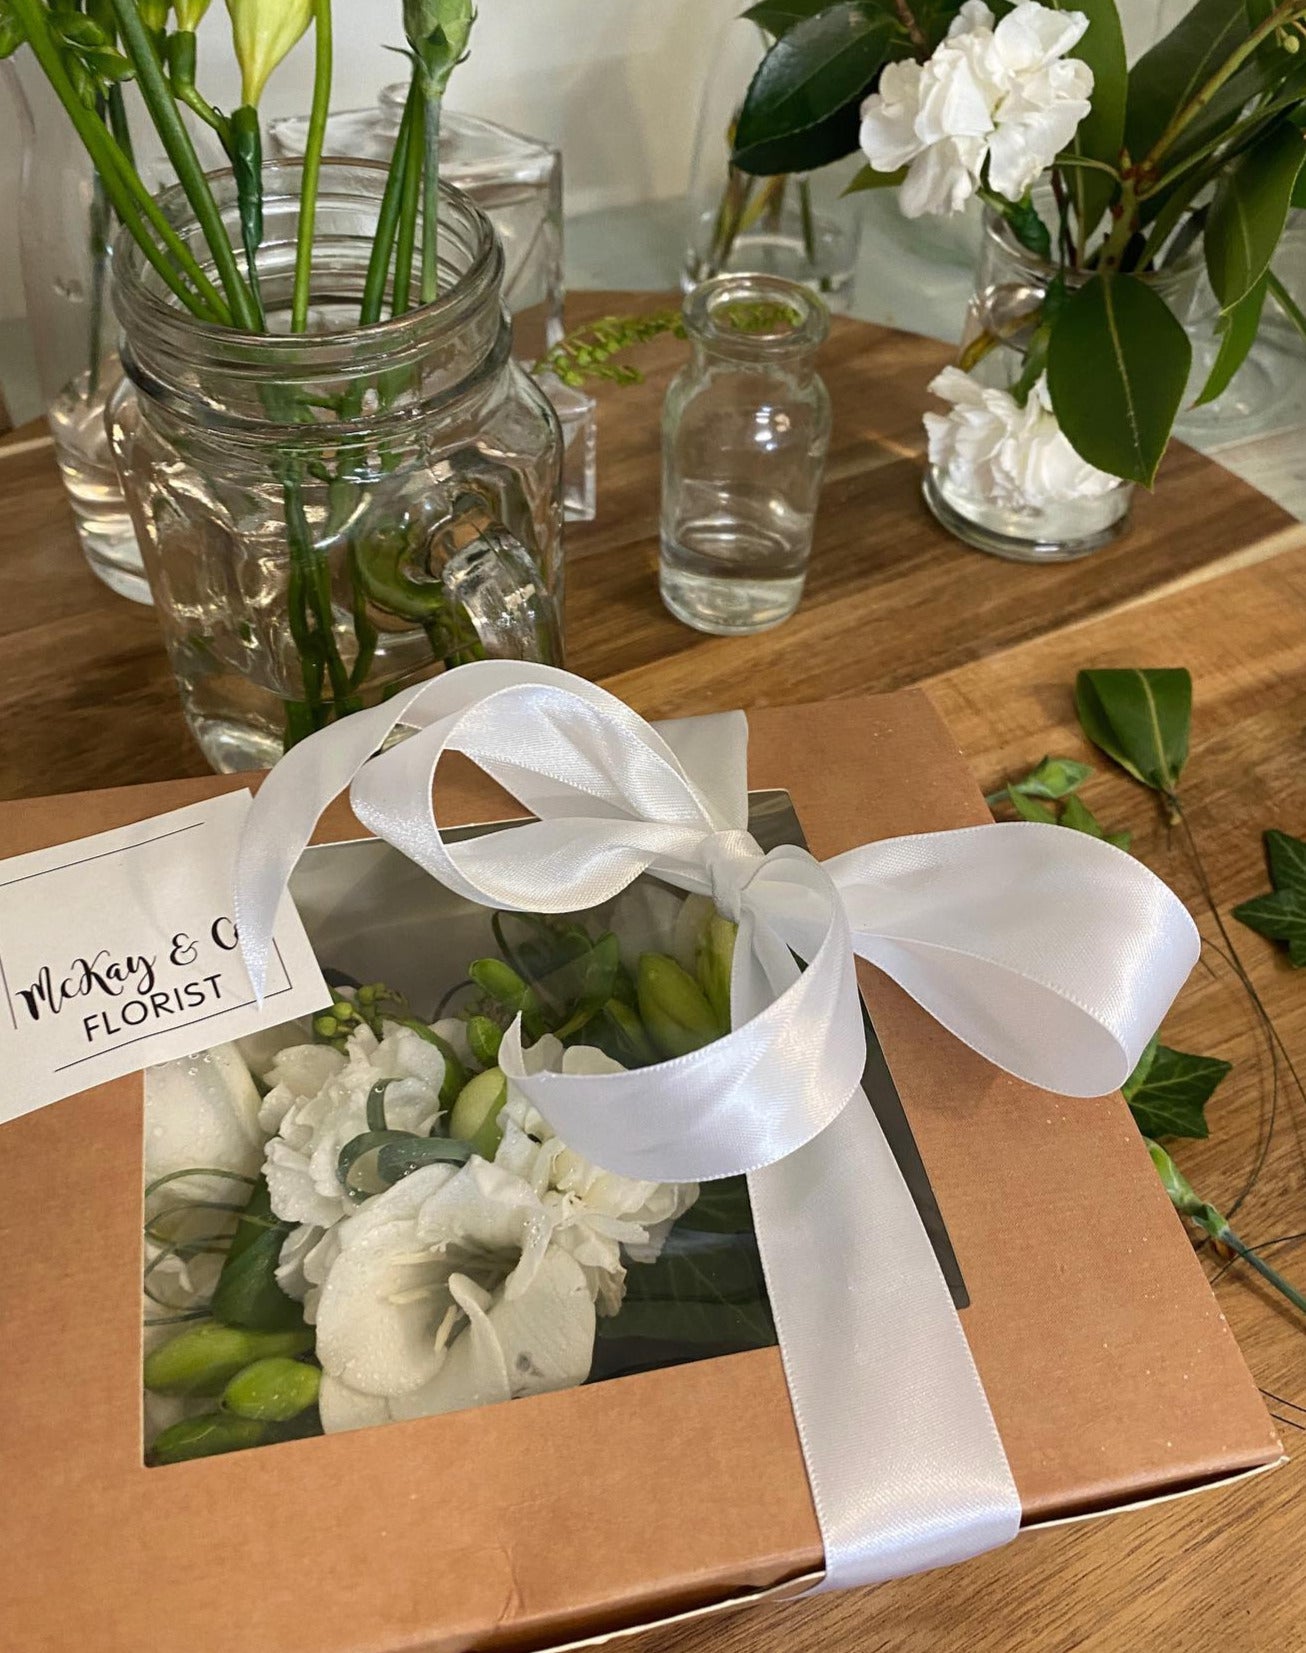 A gorgeous wrist corsage made with white flowers and interesting green foliage to complement any outfit. With a matching buttonhole to complete the look. Included is a box of locally hand crafted Adelphi Chocolates.